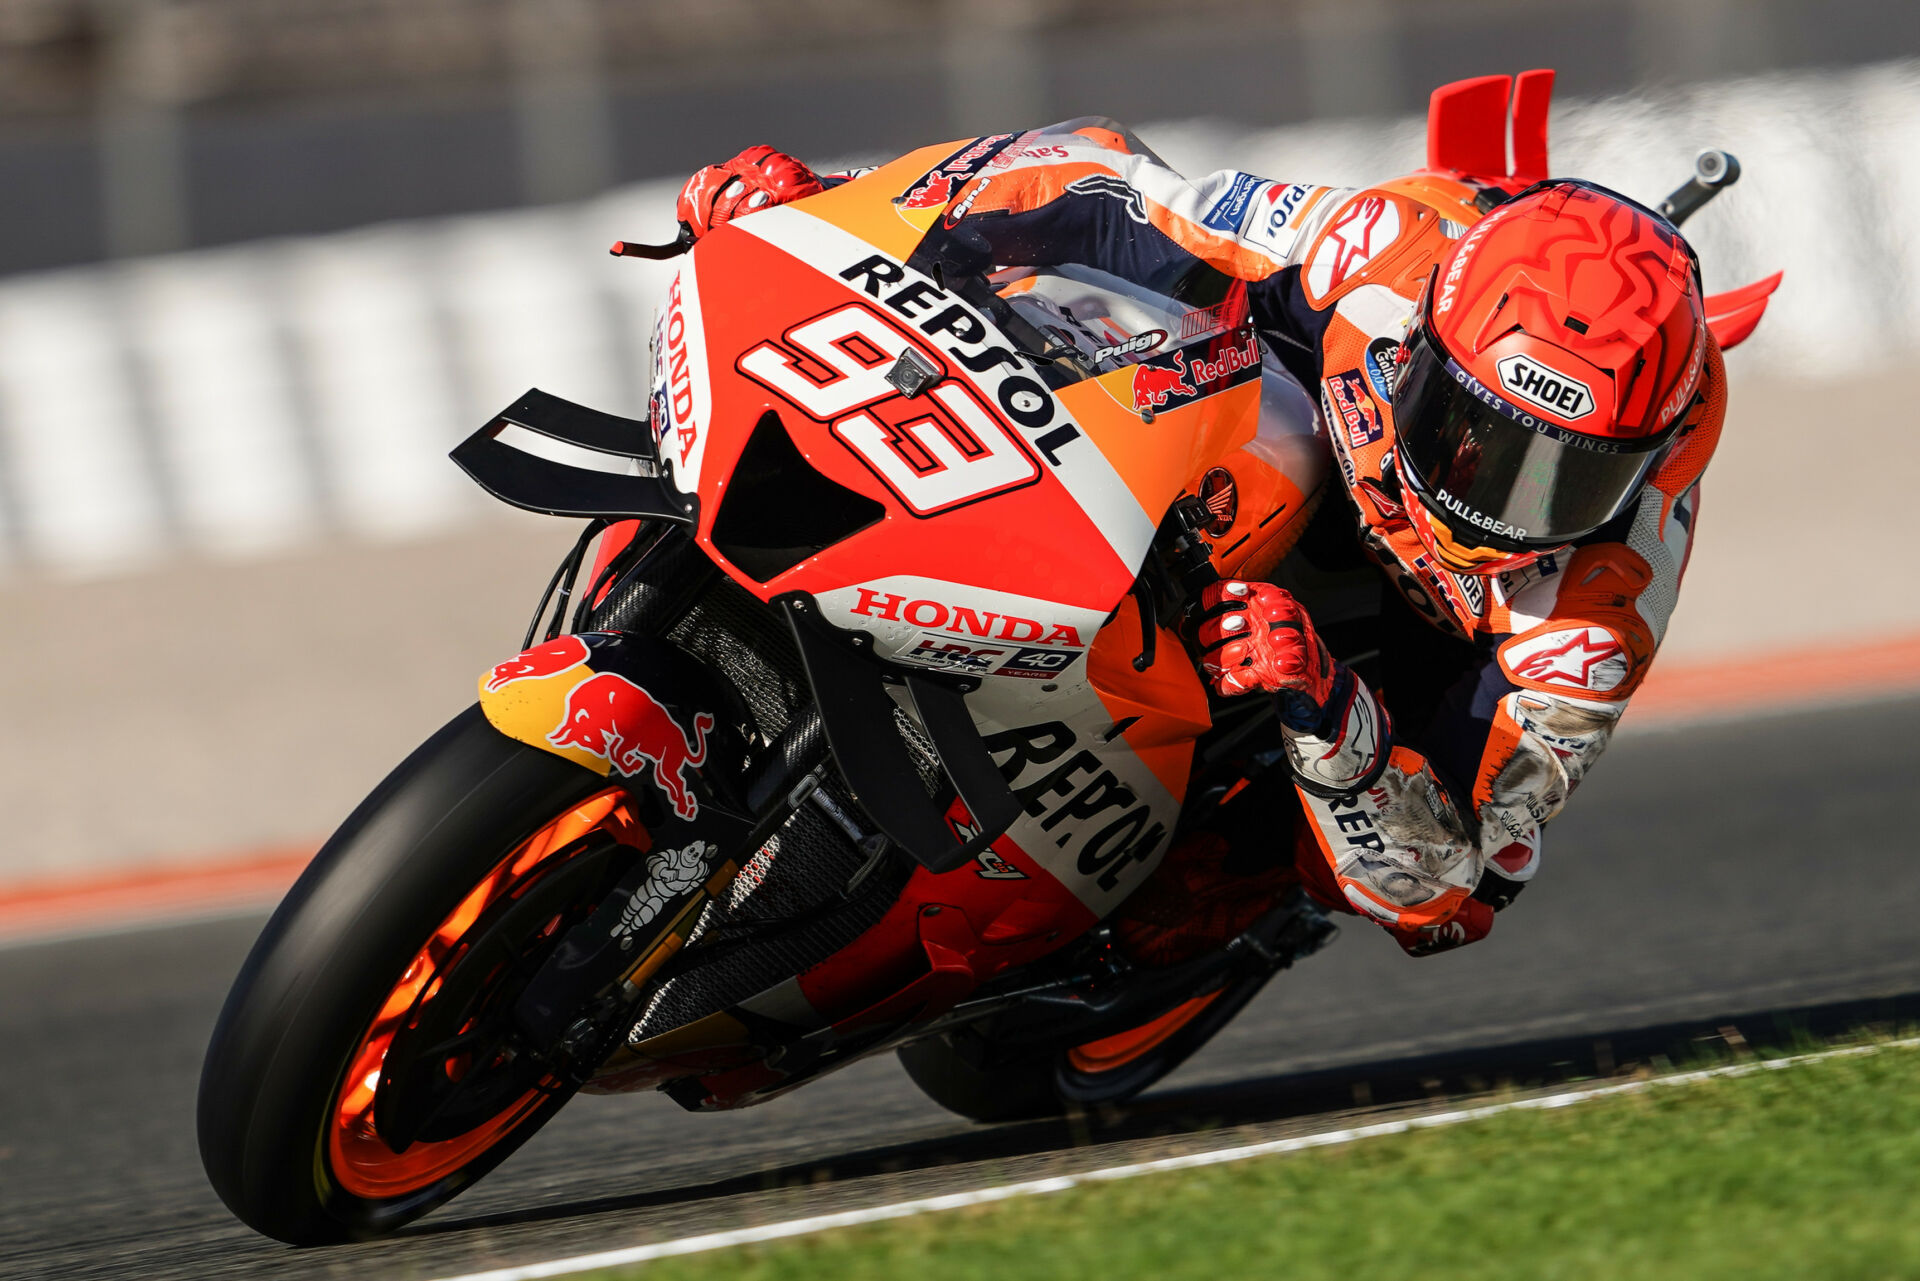 Marc Marquez (93) with new rear wings on his RC213V. Photo courtesy Repsol Honda.